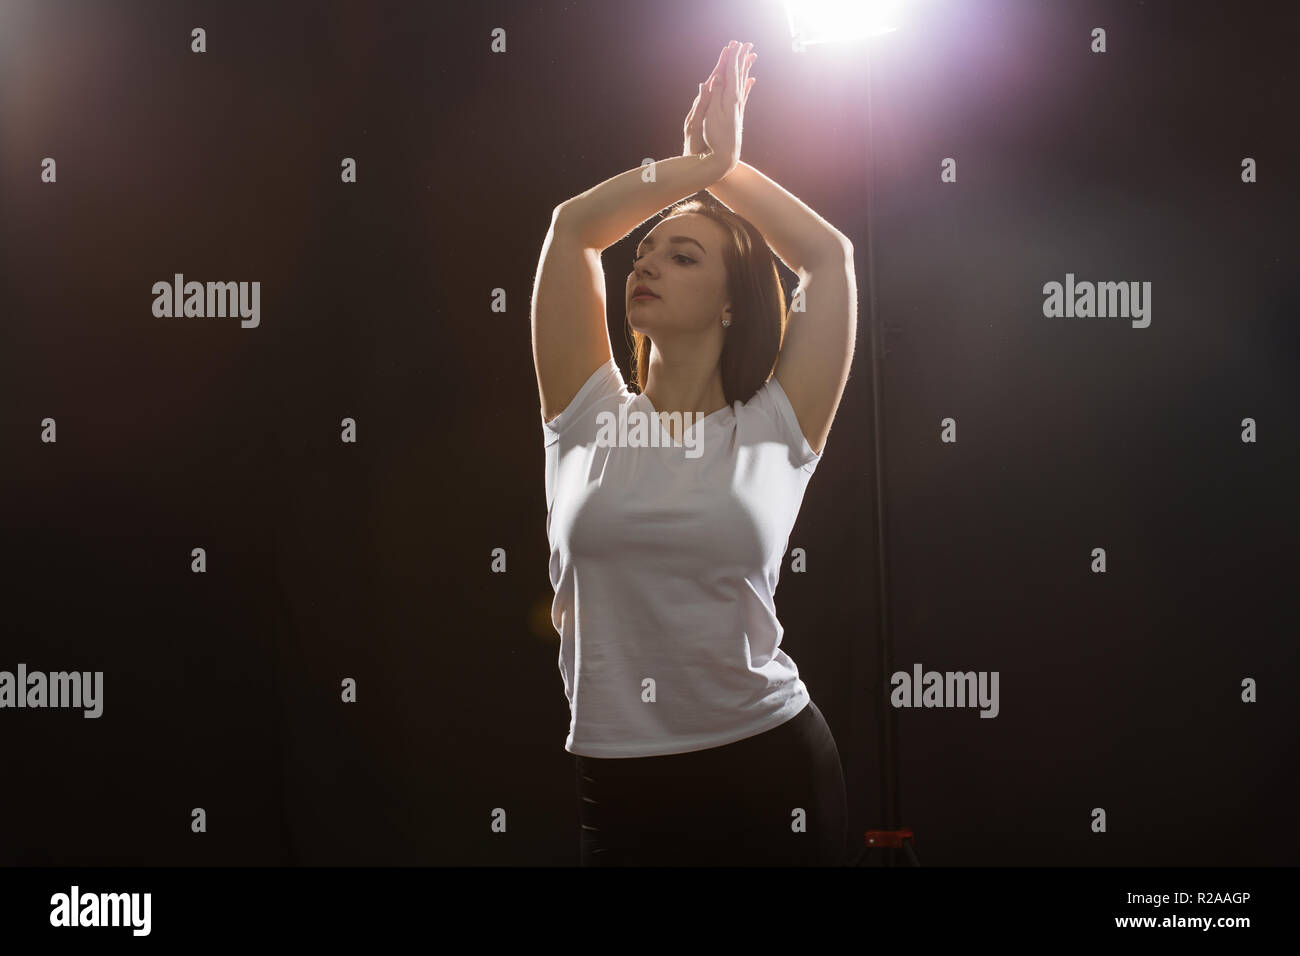 Dancing, jazz-funk and hip-hop concept - young woman dancing in darkness and folded her arms over her head Stock Photo